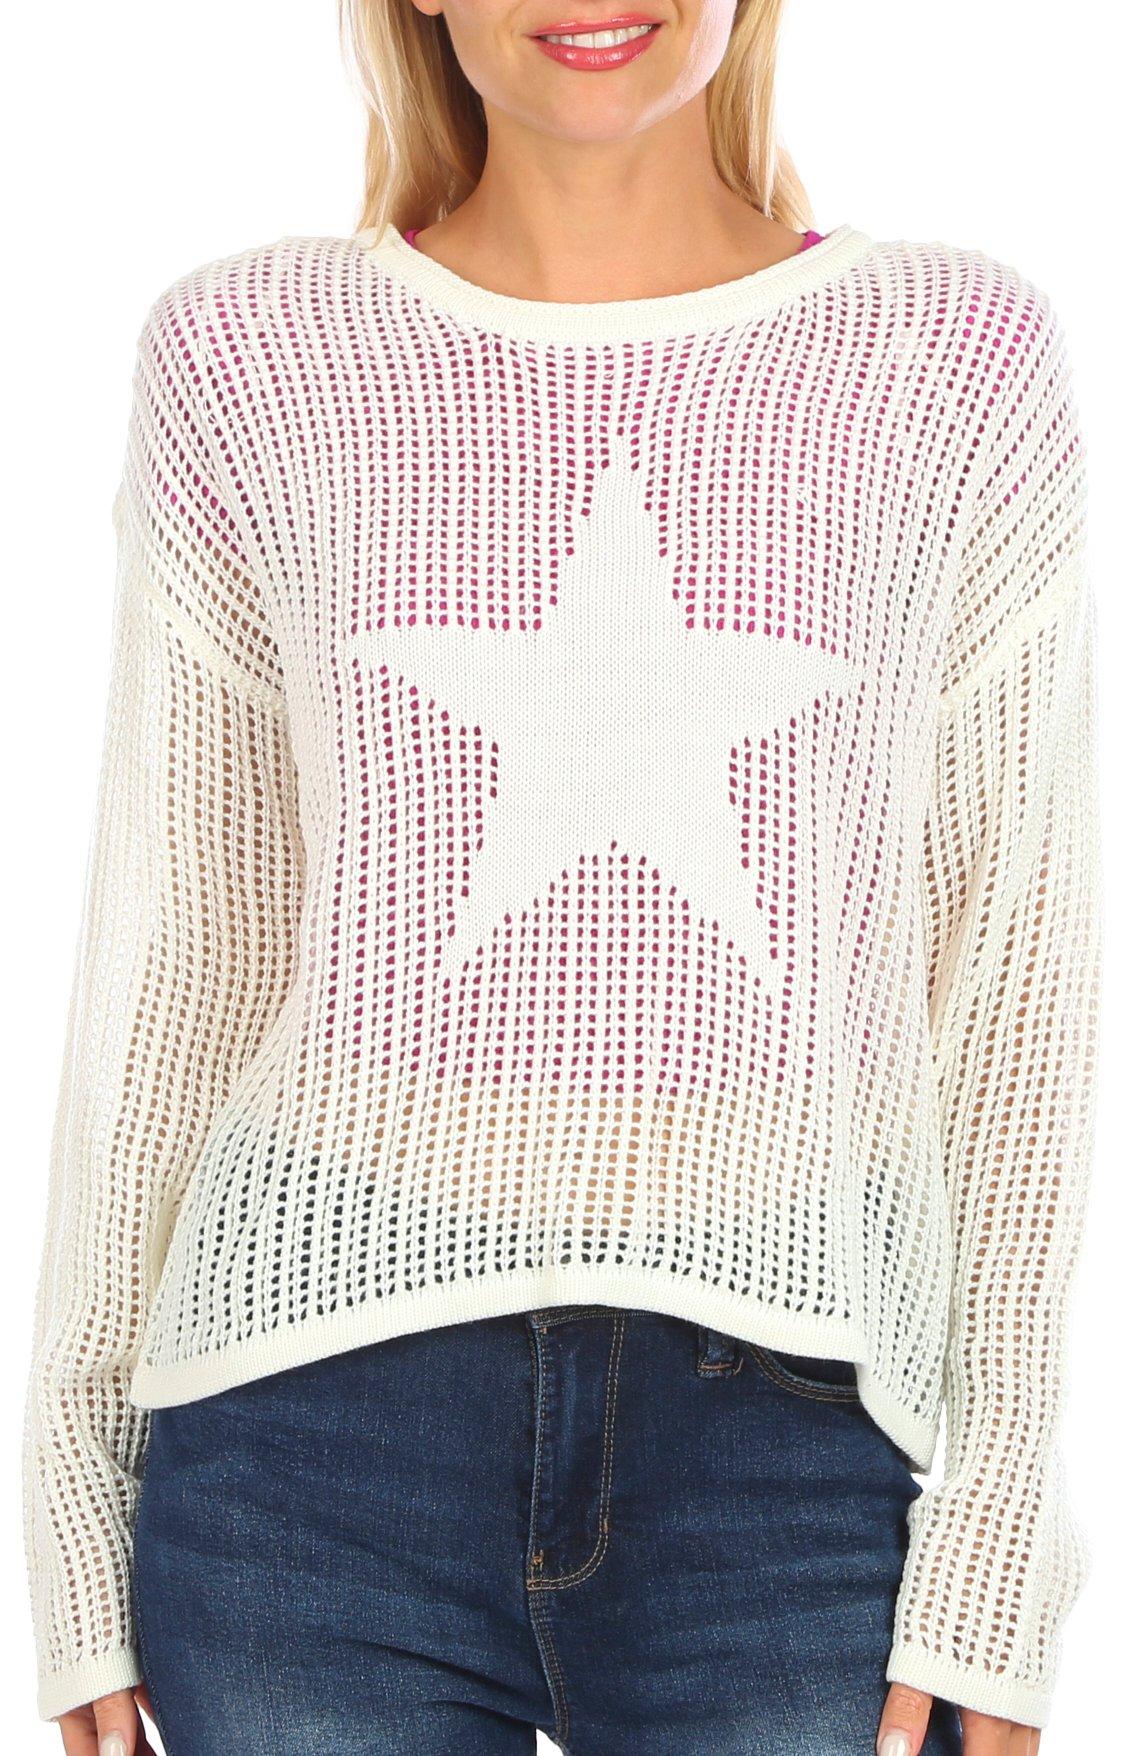 No Comment Juniors Star Pull-On Crochet Long Sleeve Top